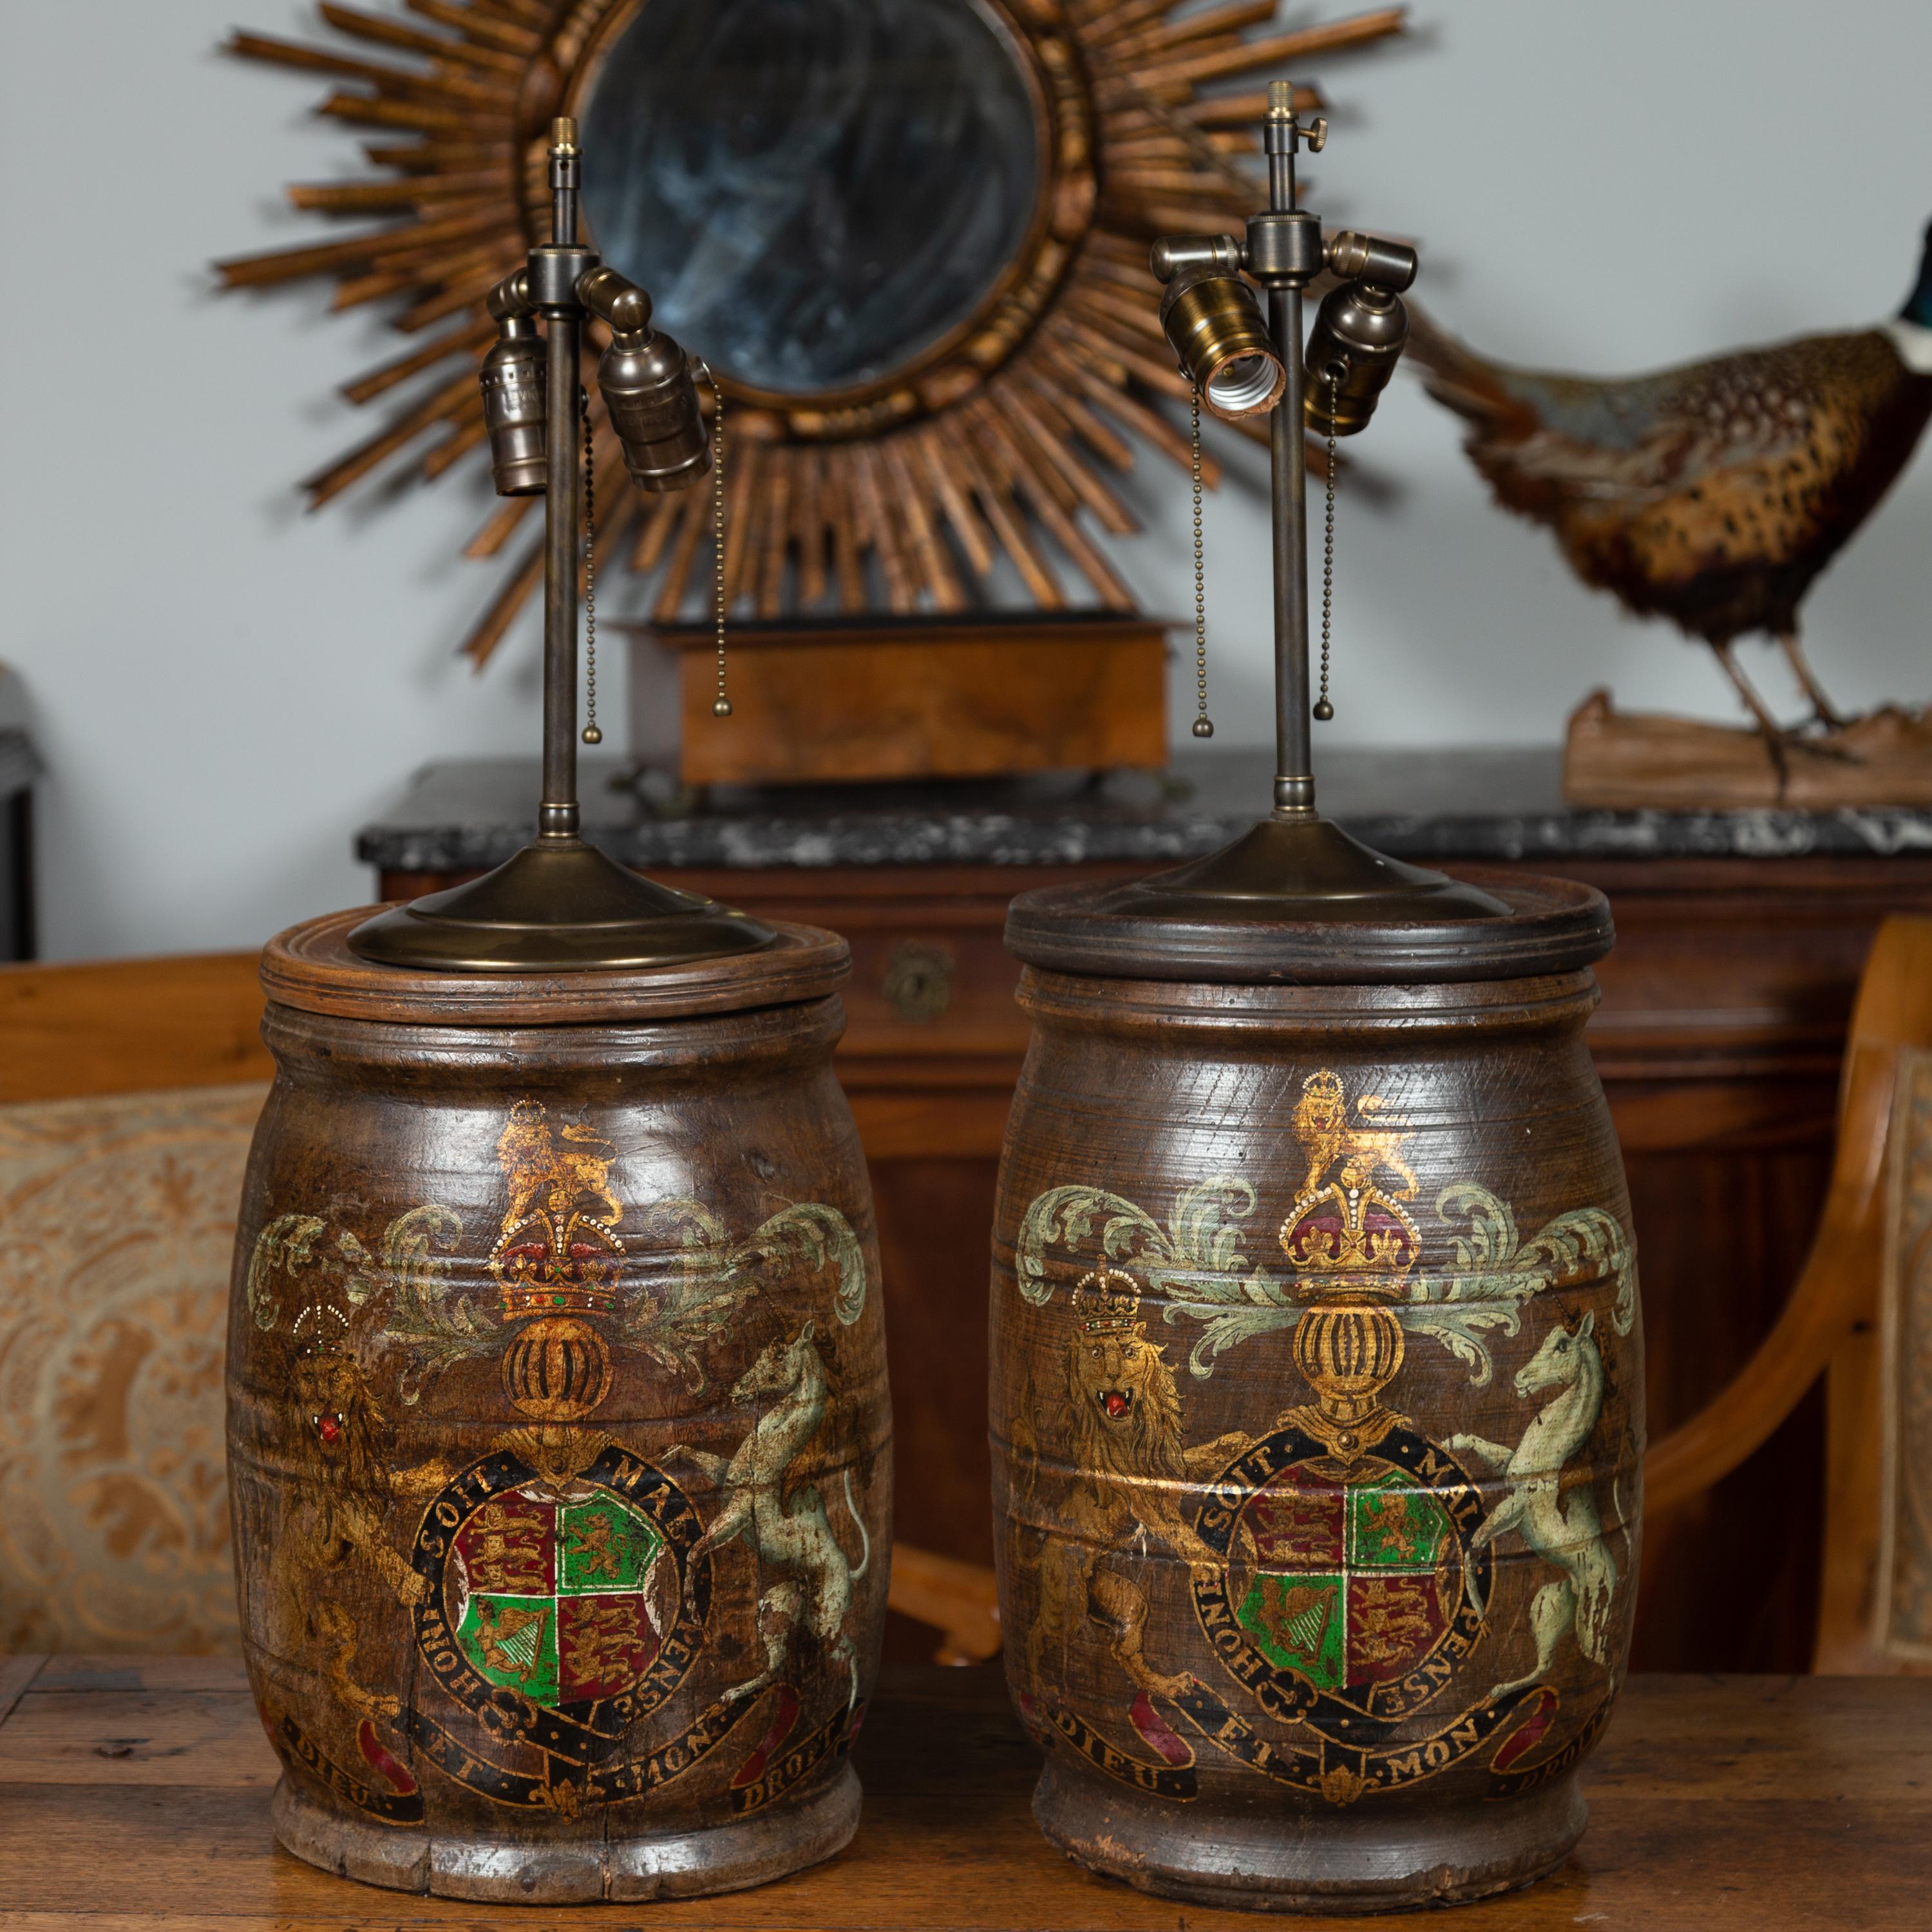 A pair of English wooden barrels from the late 19th century with the United Kingdom’s royal coat of arms, made into two-light table lamps. Born in England during the last quarter of the 19th century, this pair of English wooden barrels has been